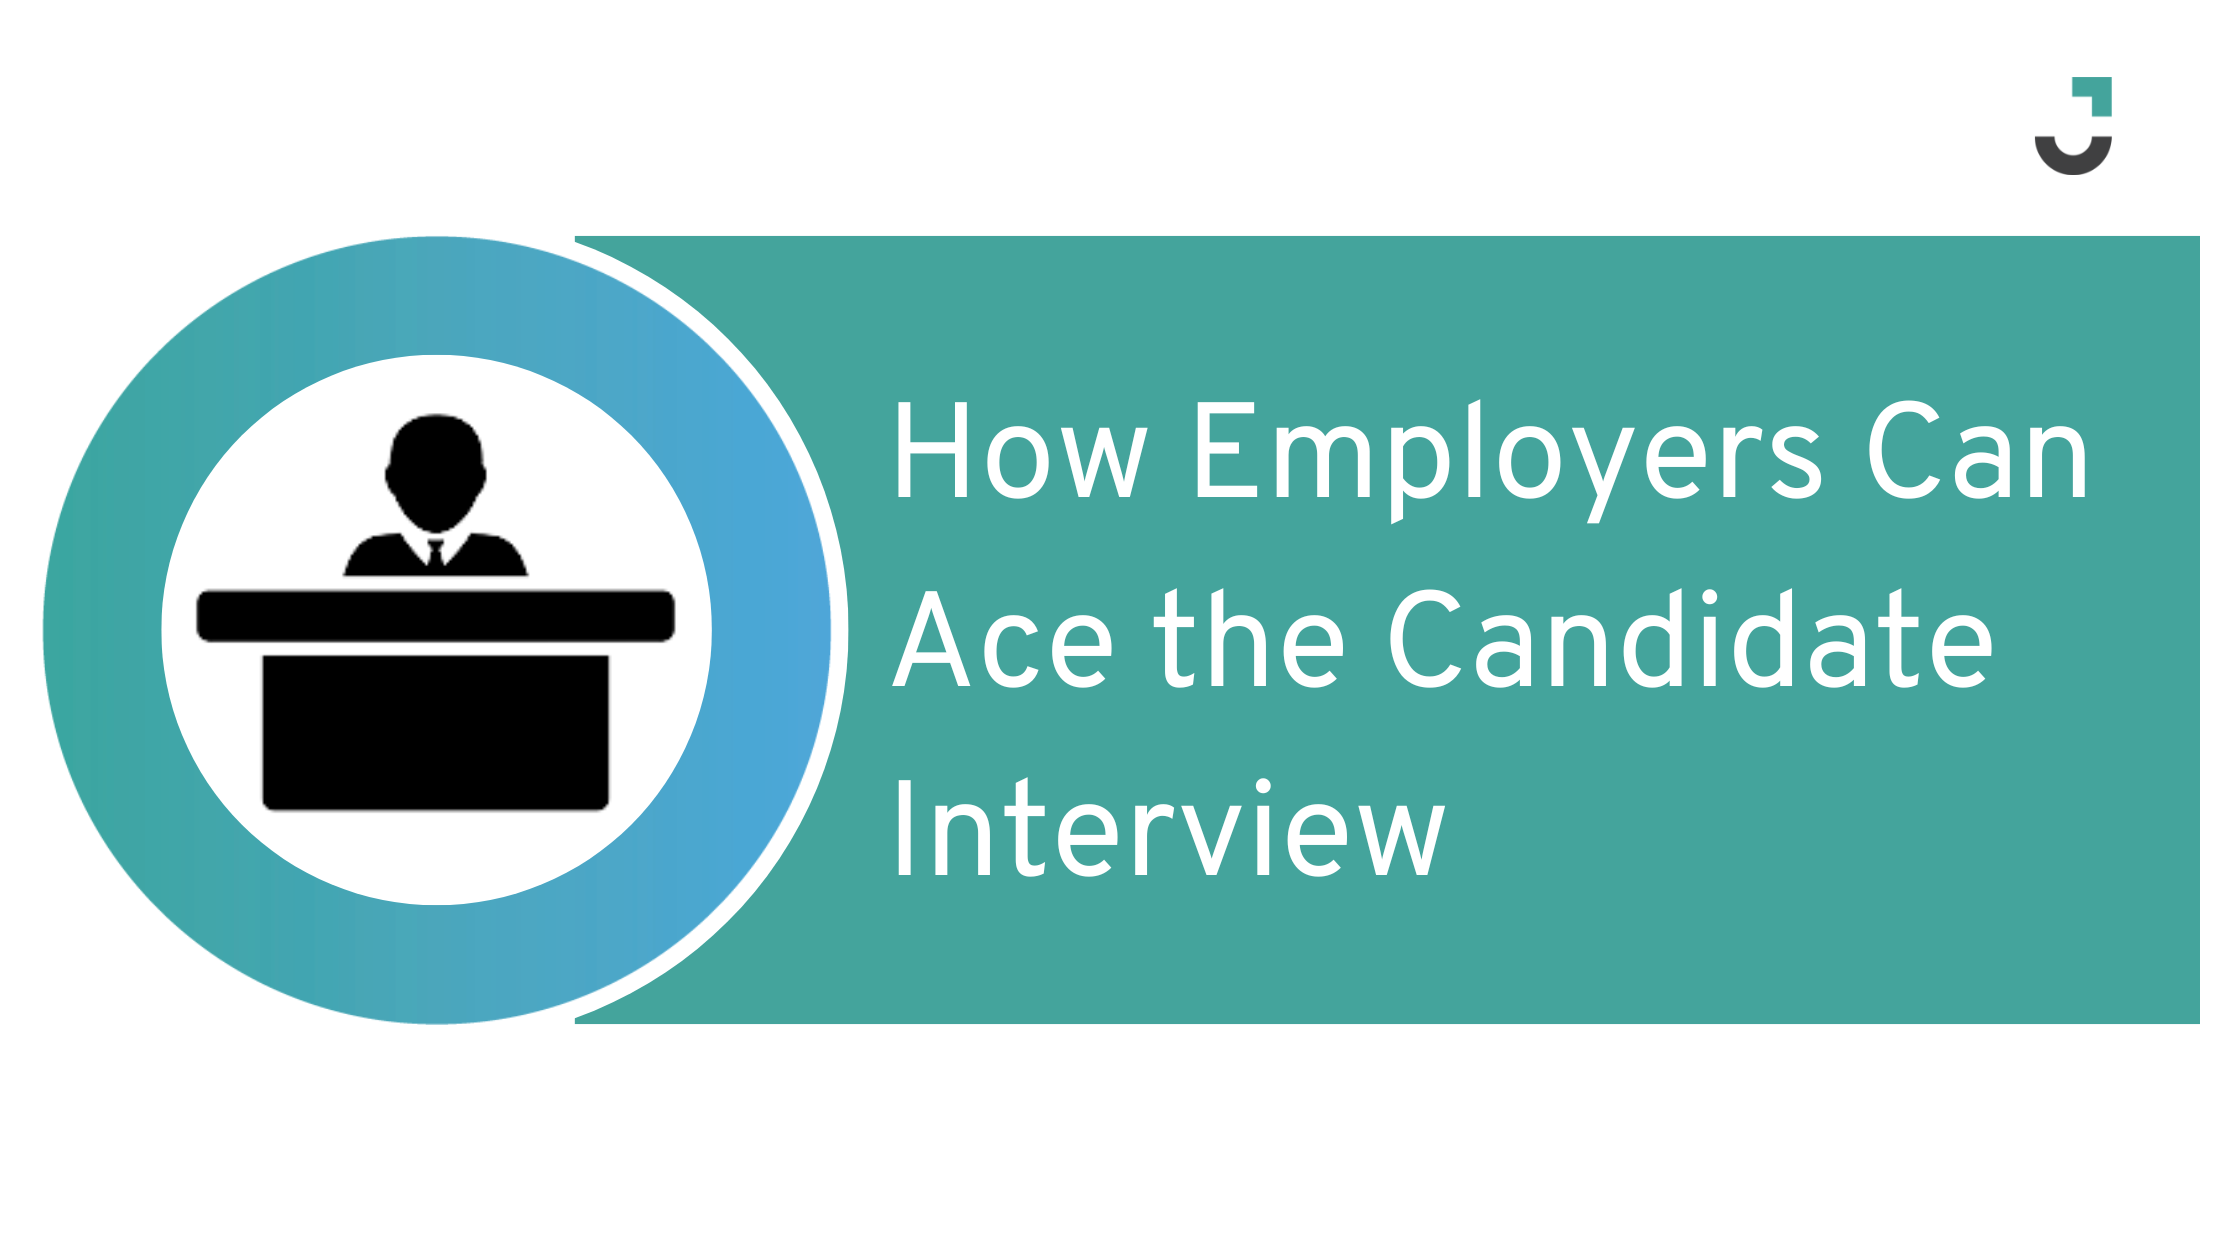 How Employers Can Ace the Candidate Interview